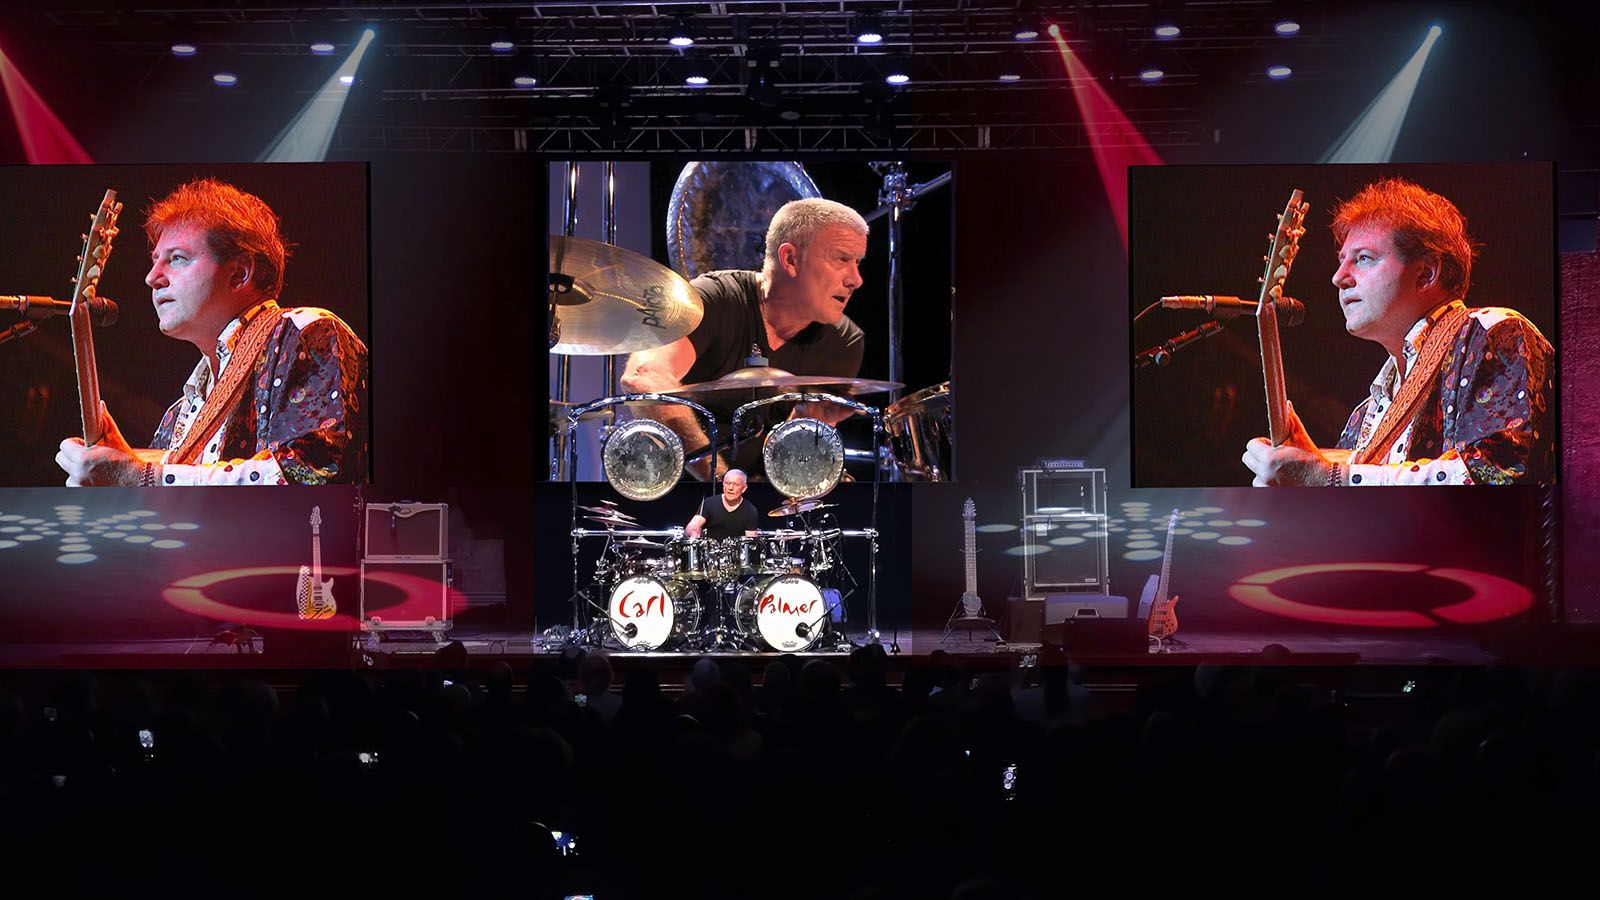 The Return of Emerson, Lake & Palmer tour includes Carl Palmer on drums with the deceased Keith Emerson and Greg Lake, pictured, on video.